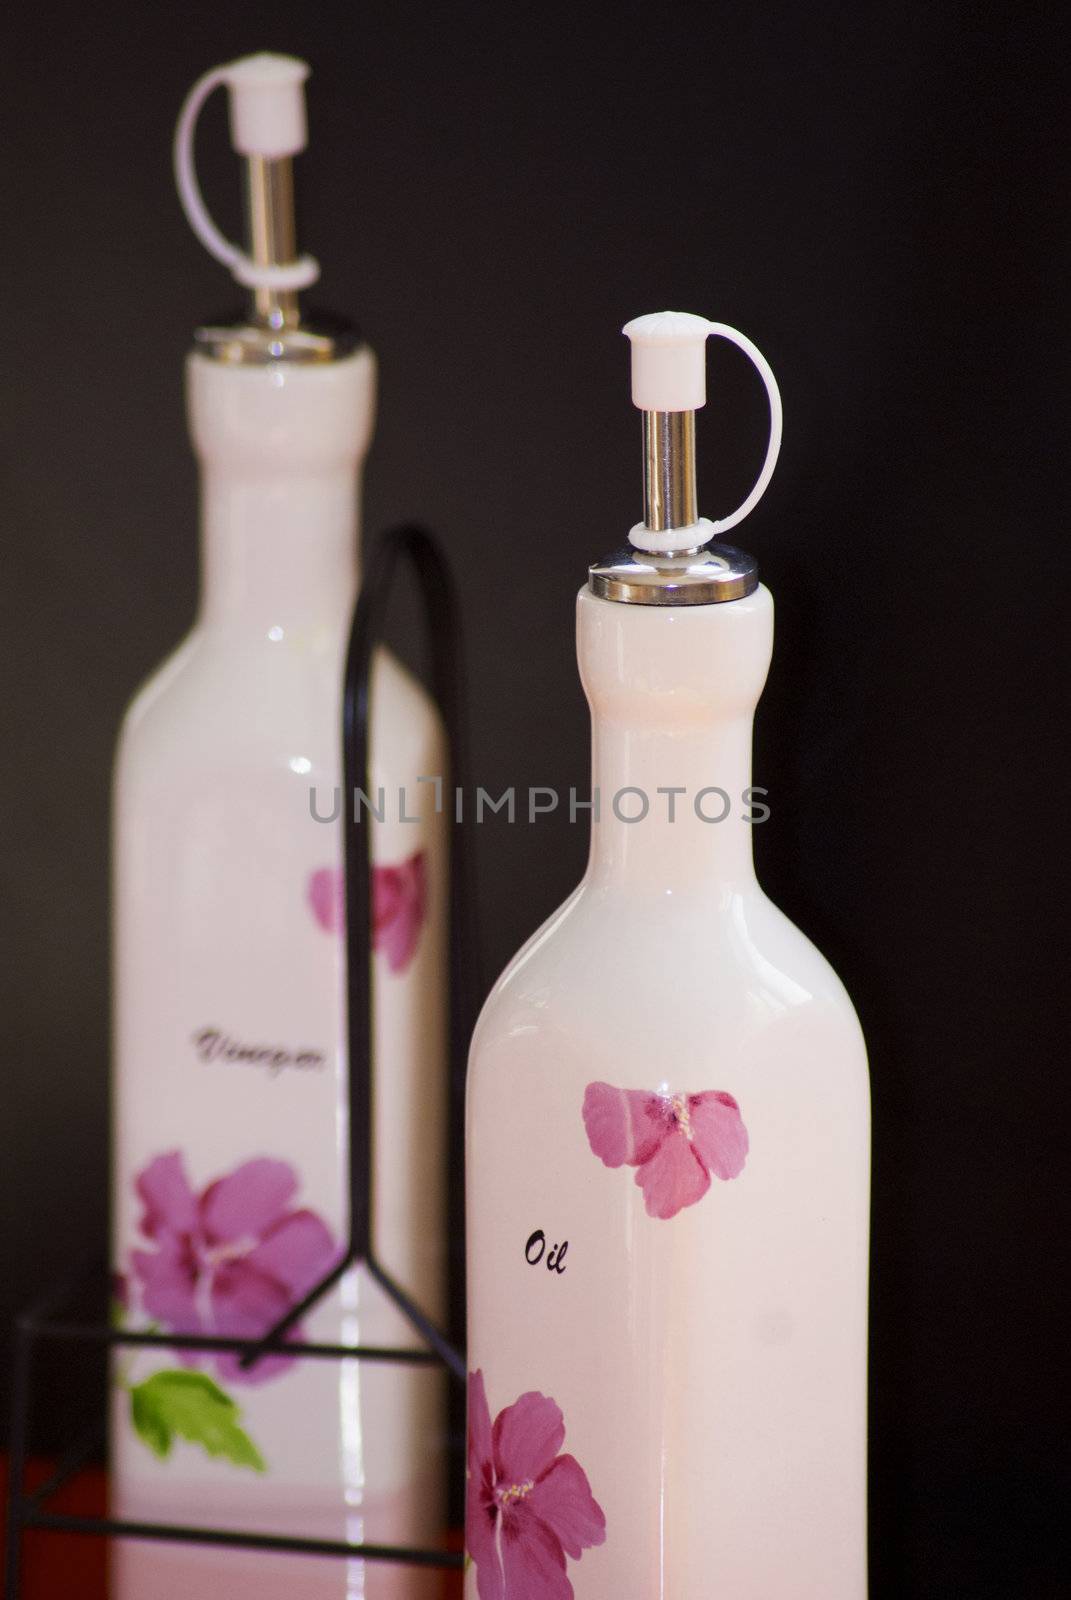 oil and vinegar bottle by photografmts